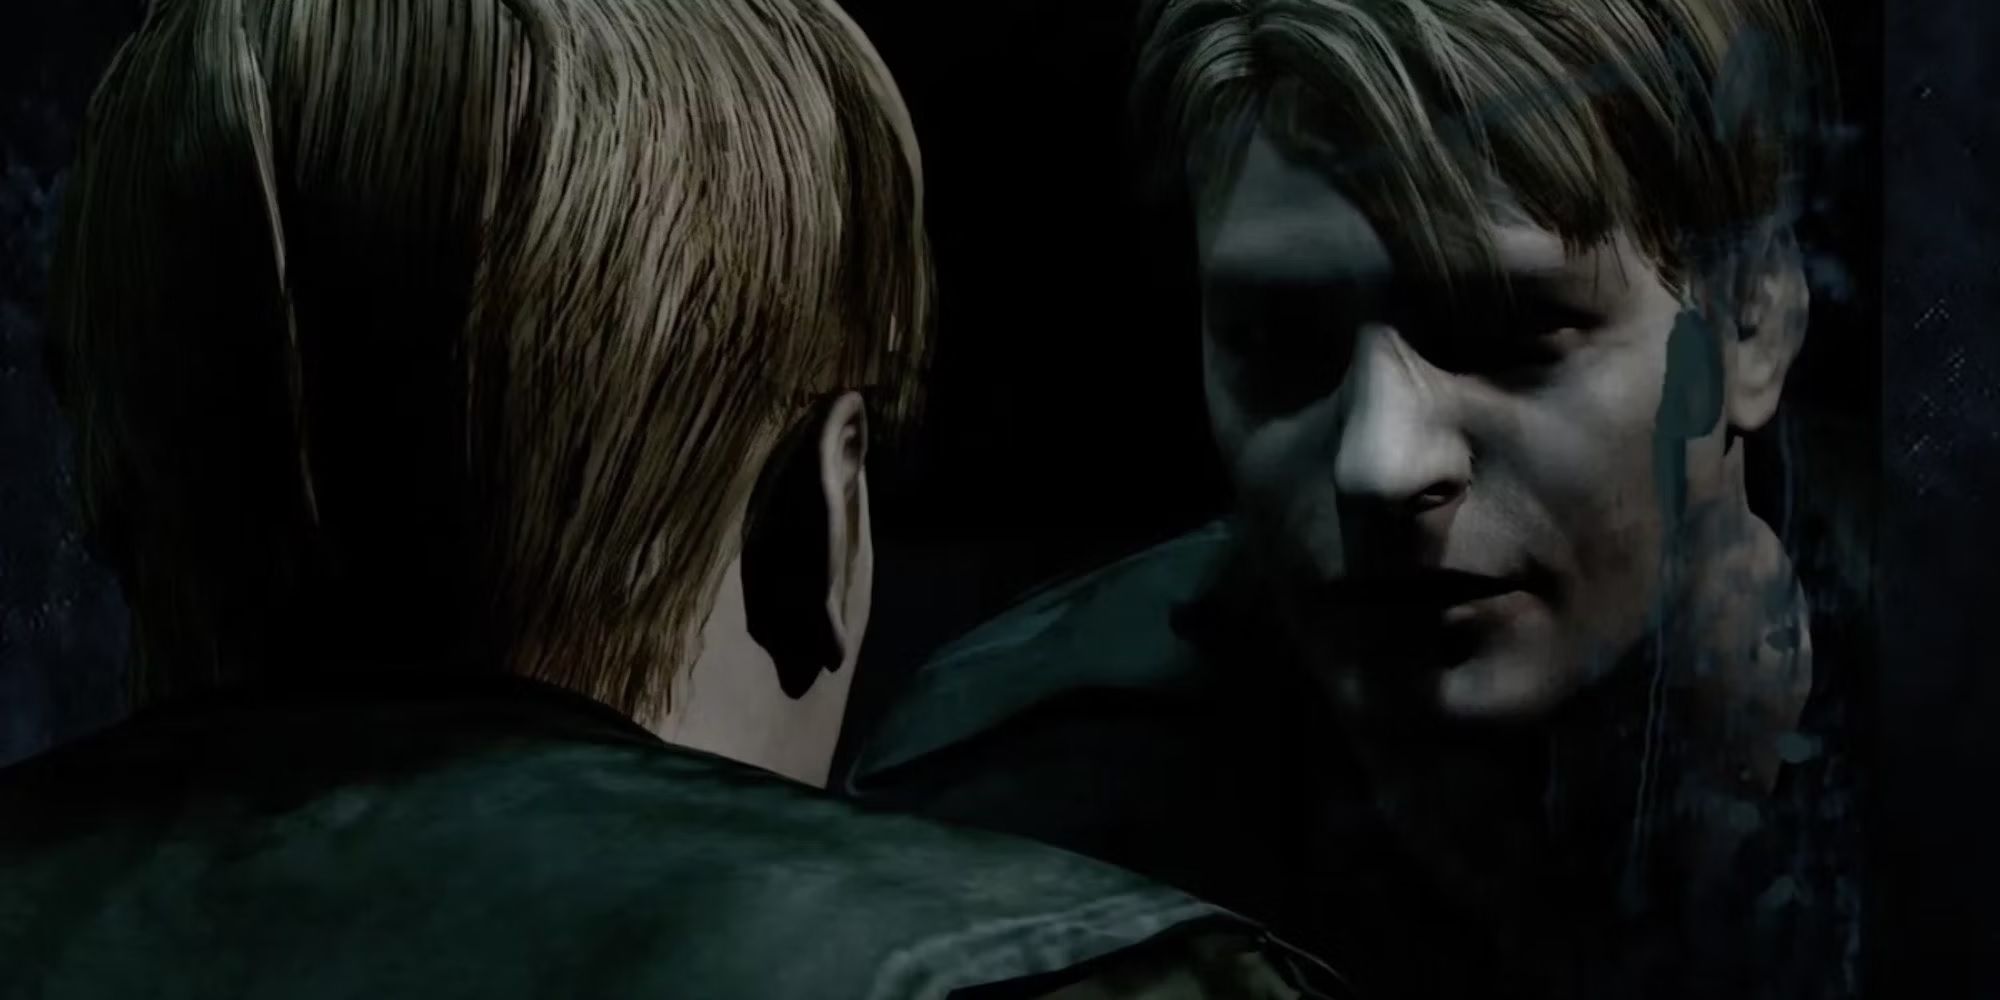 Silent Hill 2 is not technically ready” for its PS5 exclusive release